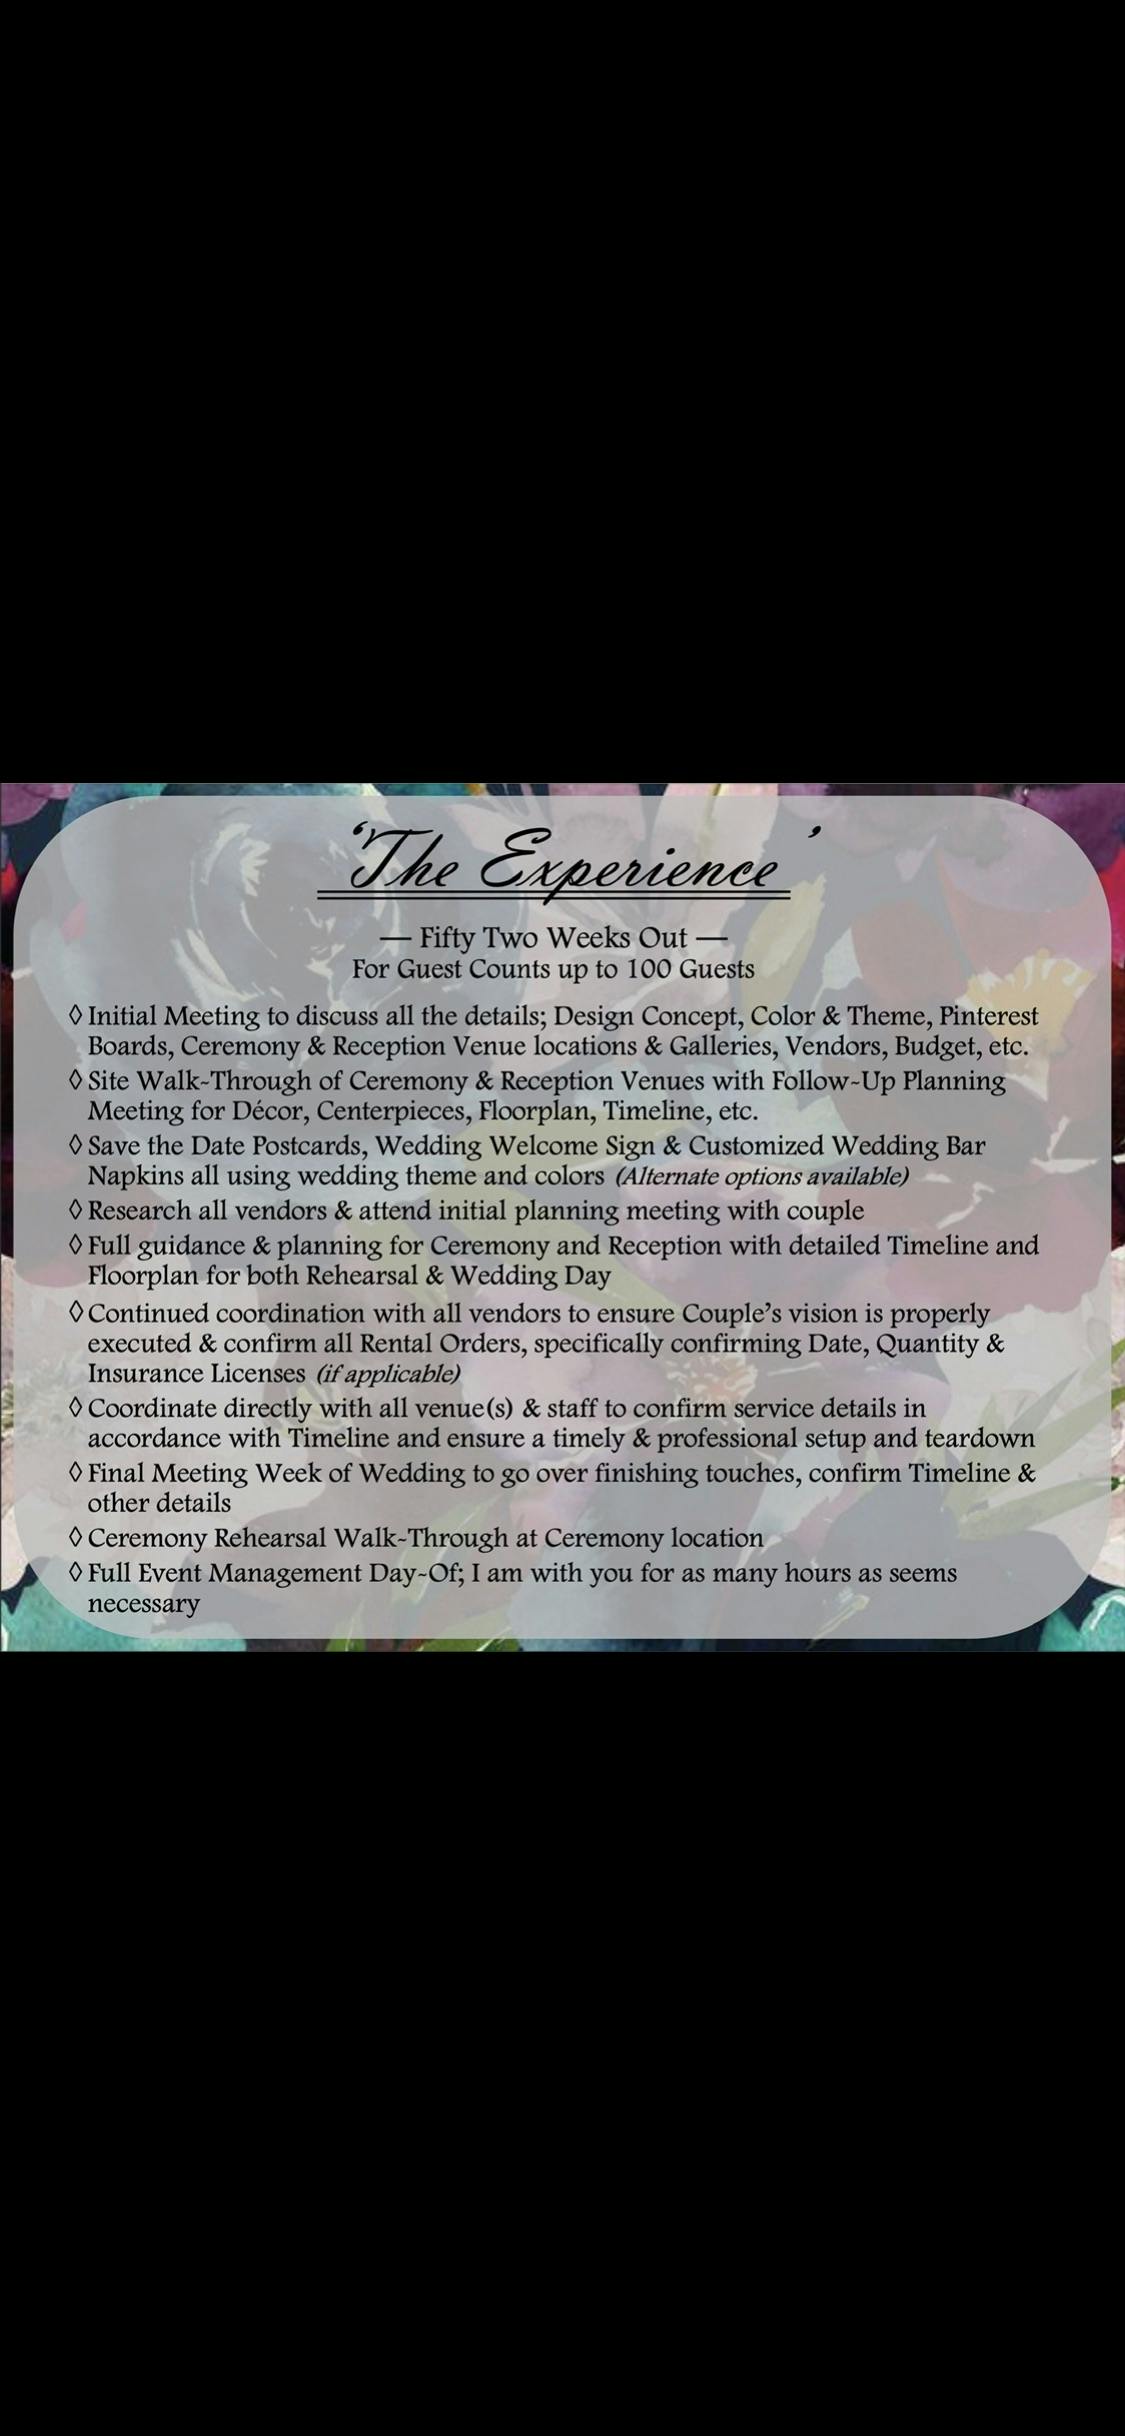 ‘The Experience’ Wedding Planning Package